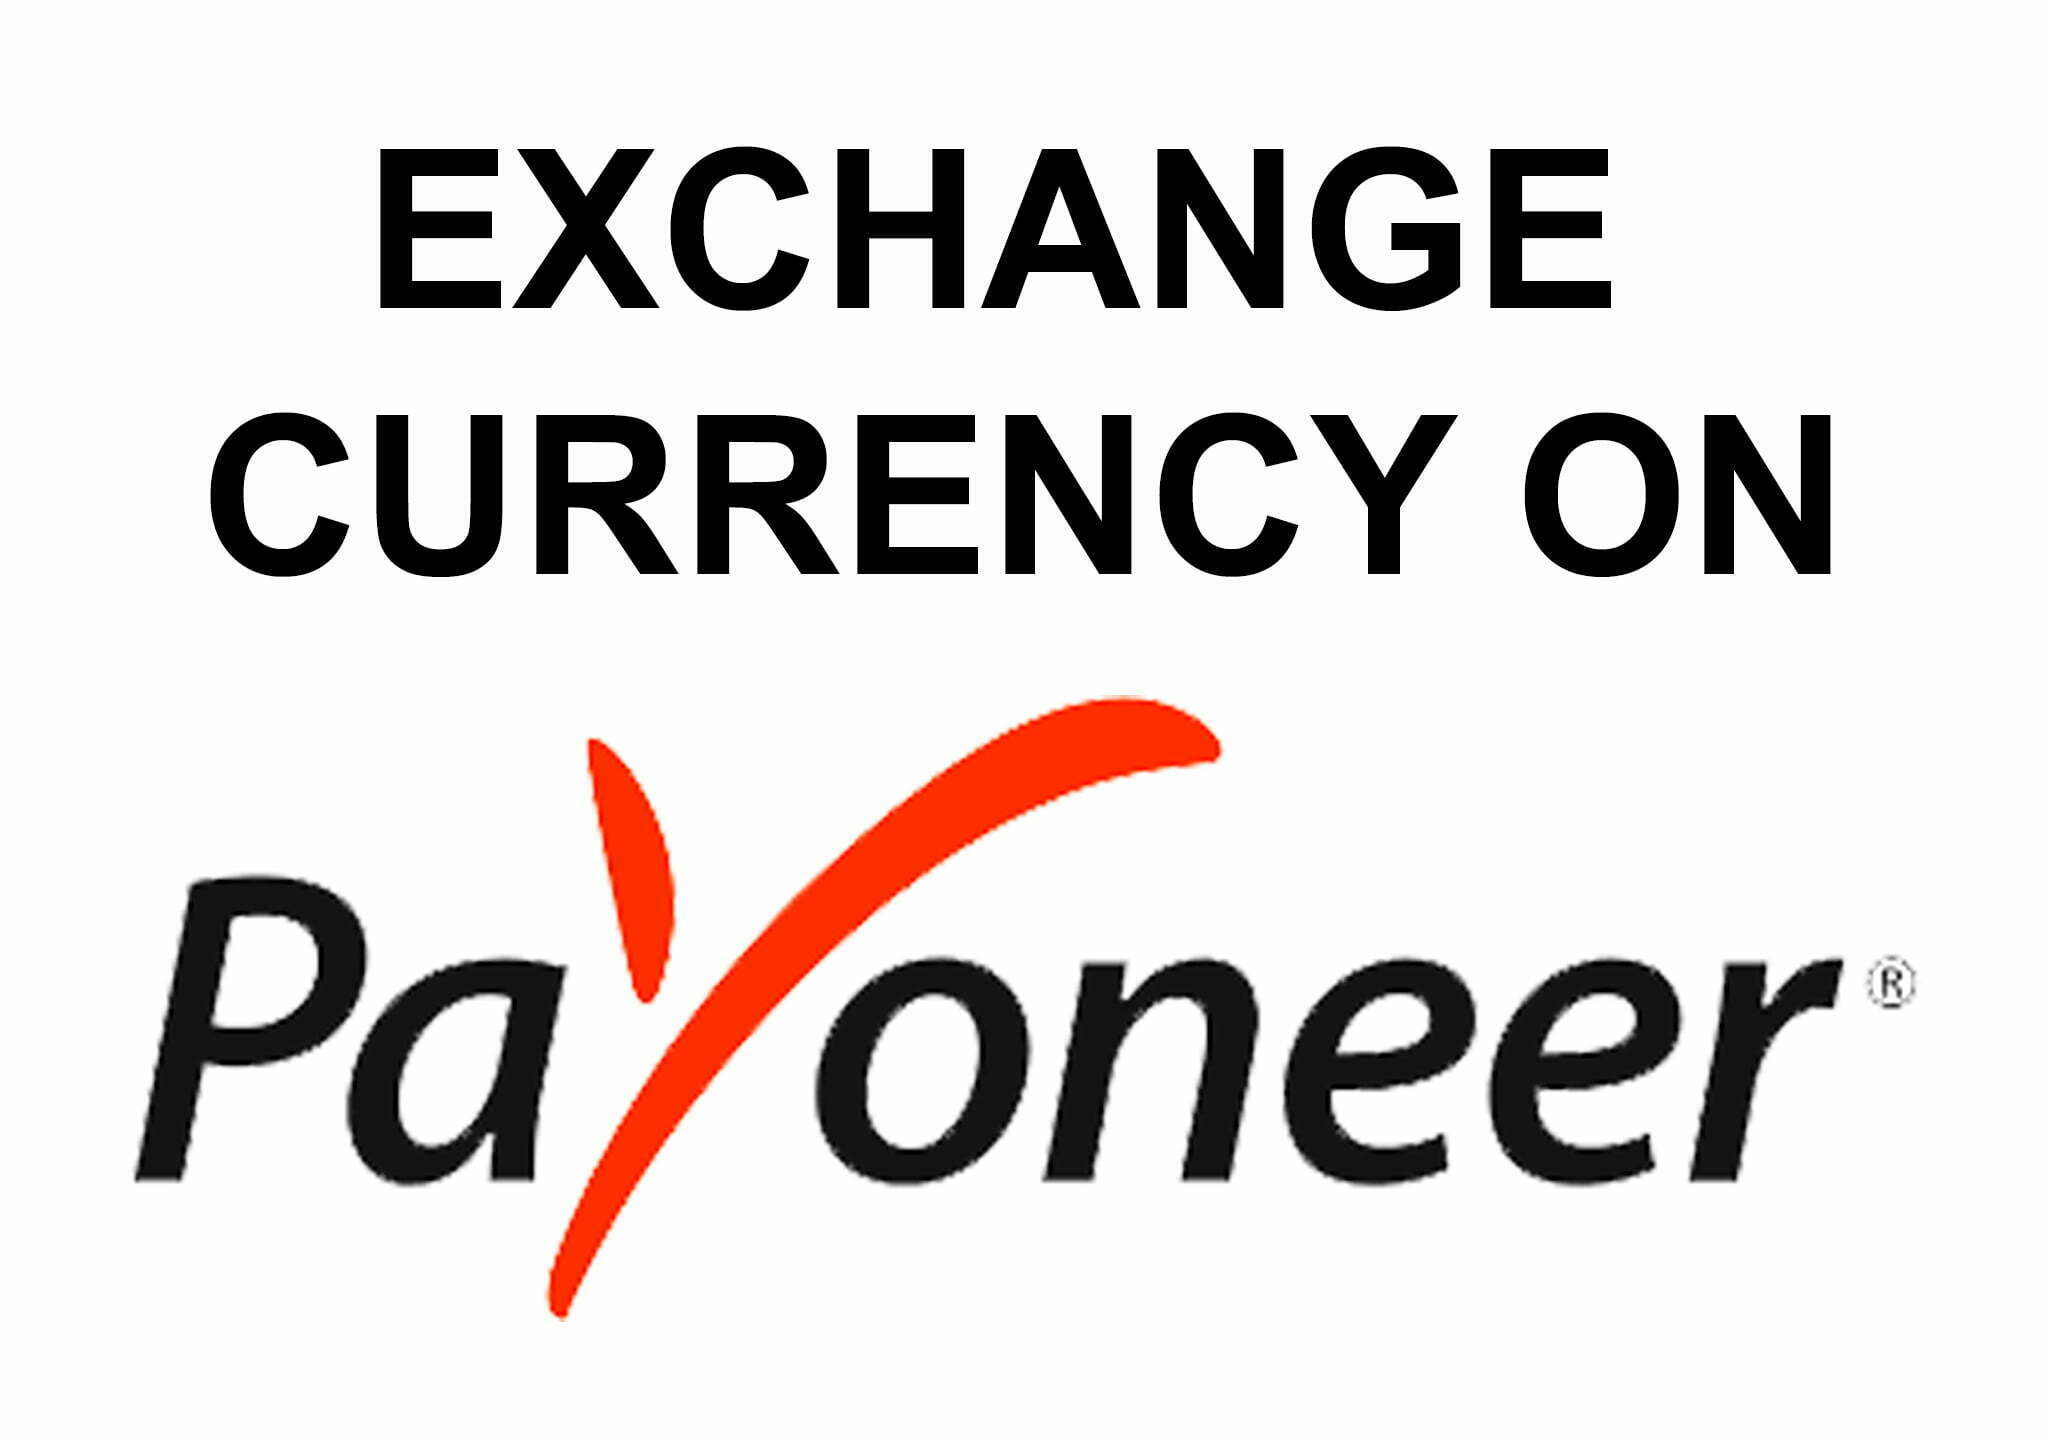 How to How to Exchange Currency on Payoneer - Best Method